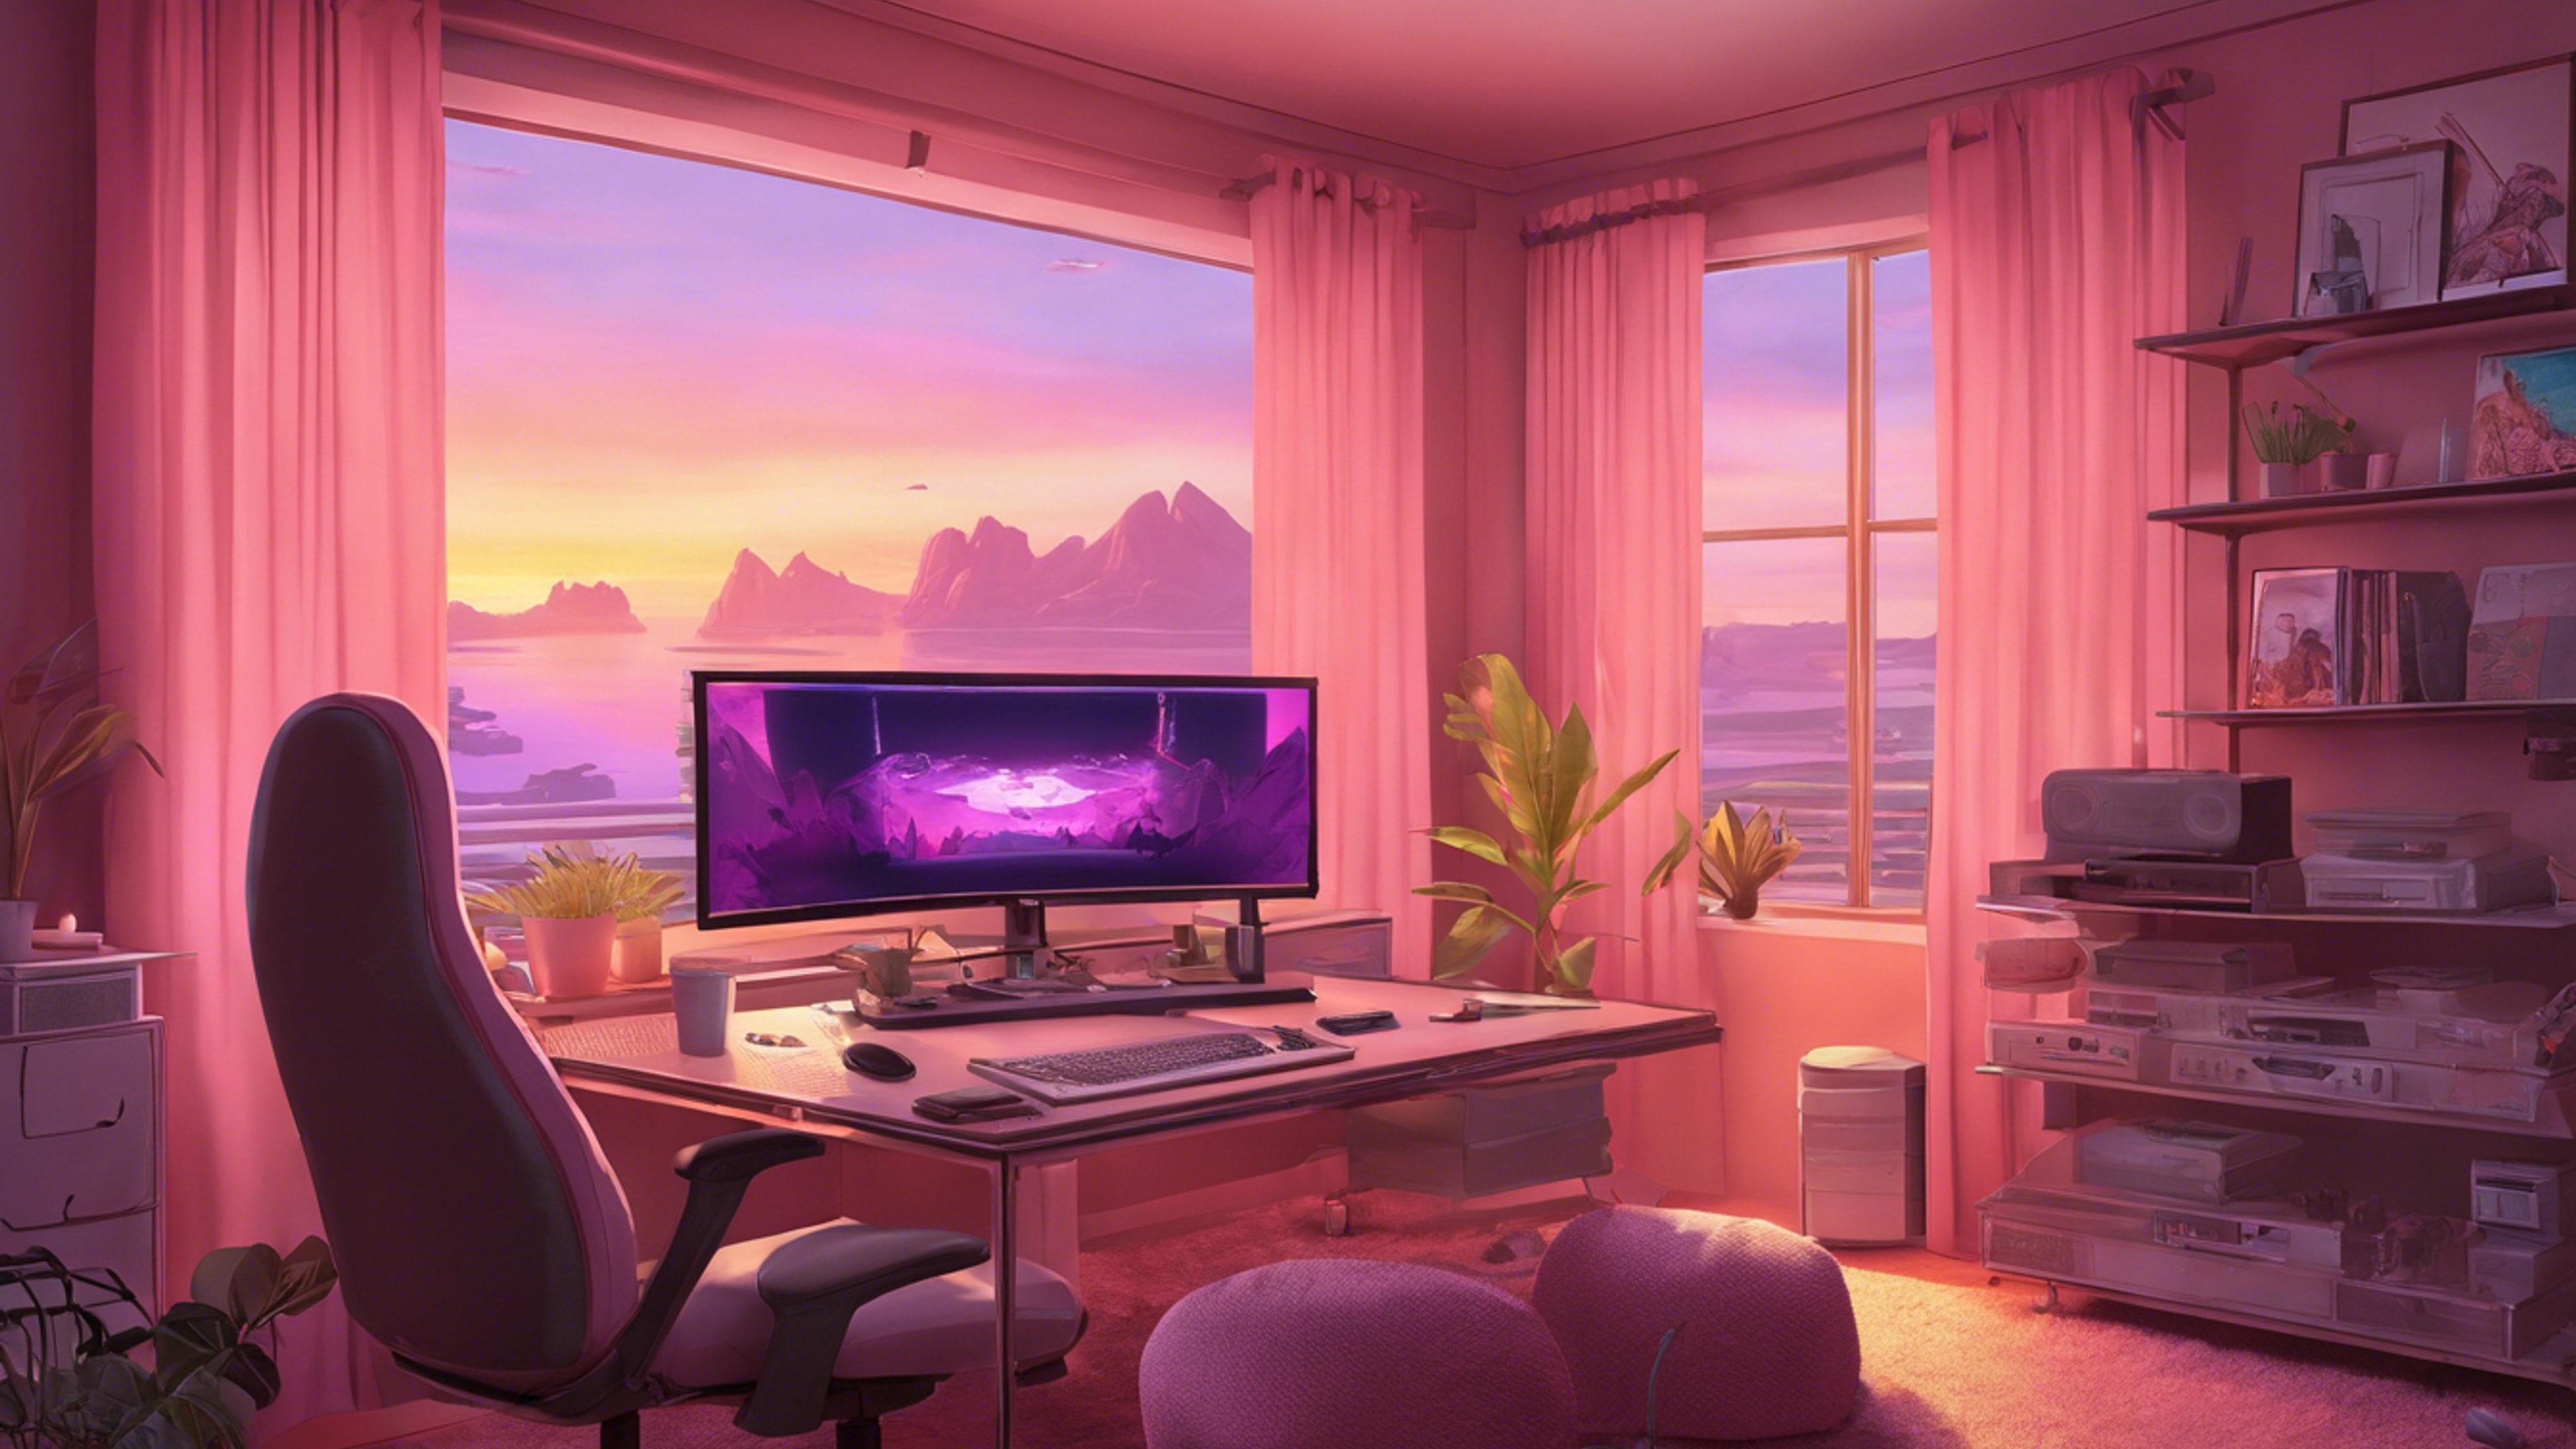 A beautiful shot of a gaming room at dusk with pastel pink curtains slightly drawn, allowing soft sunset hues to blend with the gaming setup's ambient light. کاغذ دیواری[98f2c4ff56214265aa5c]